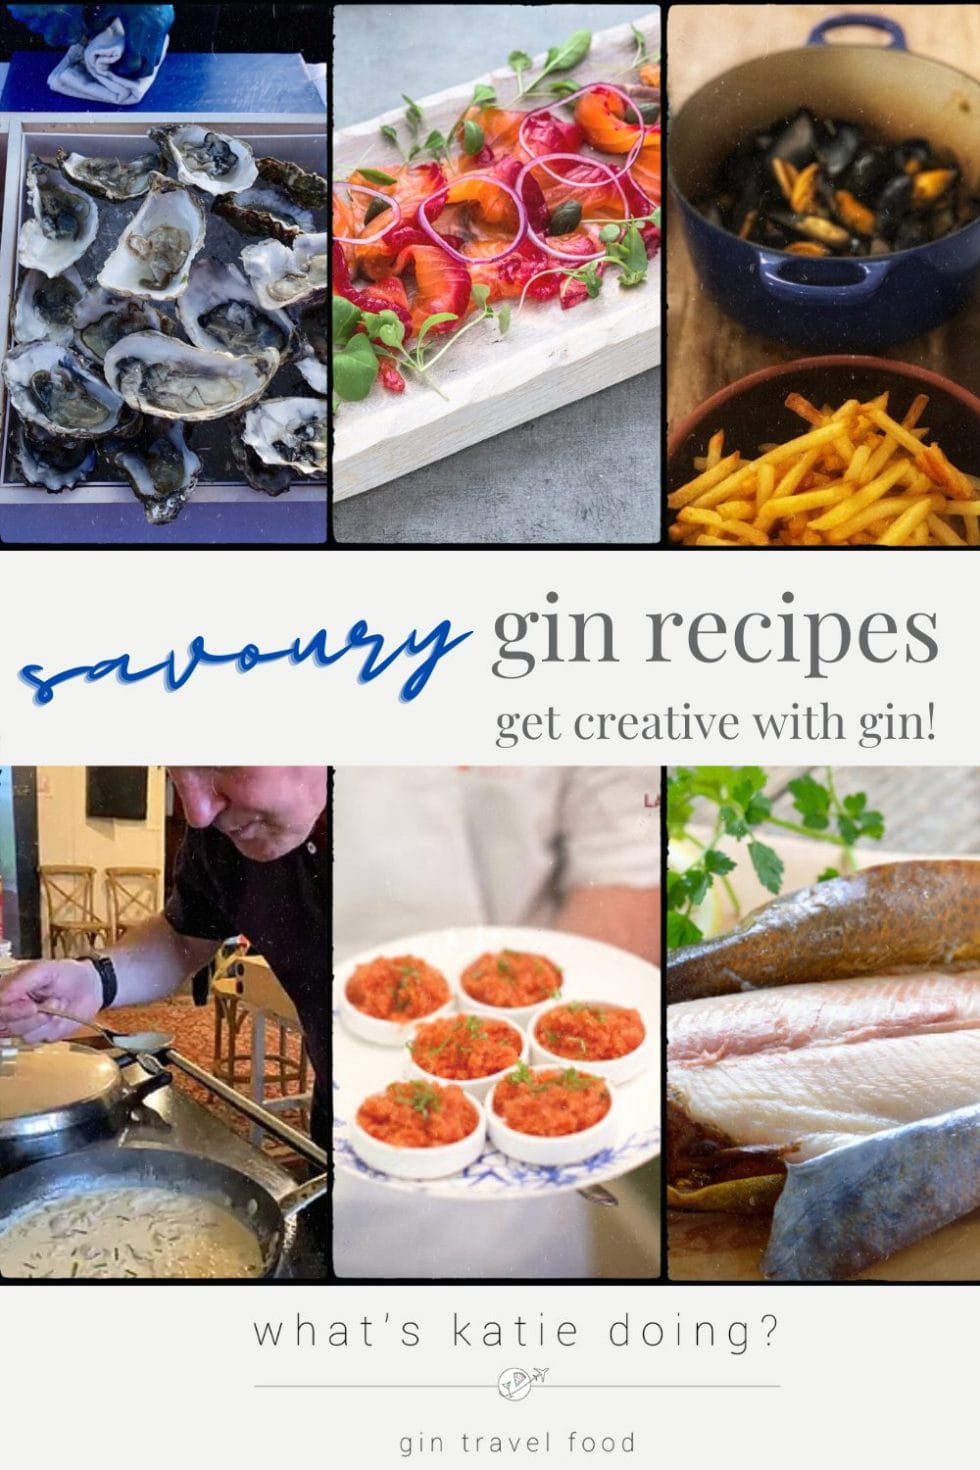 Cooking with gin: savoury edition - get creative cooking with gin